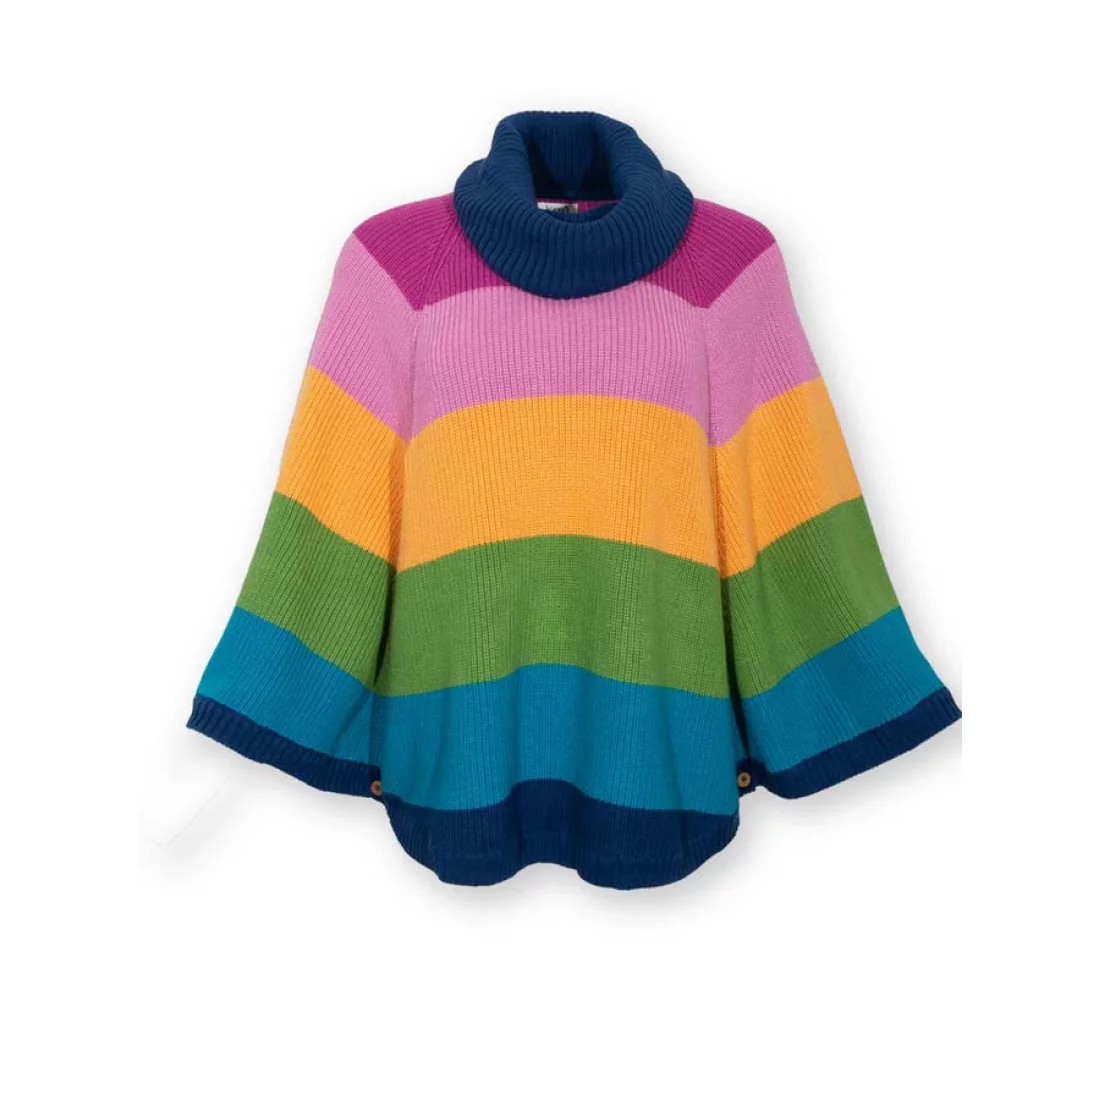 Kite Poole Poncho - Kite Clothing Natural Collection